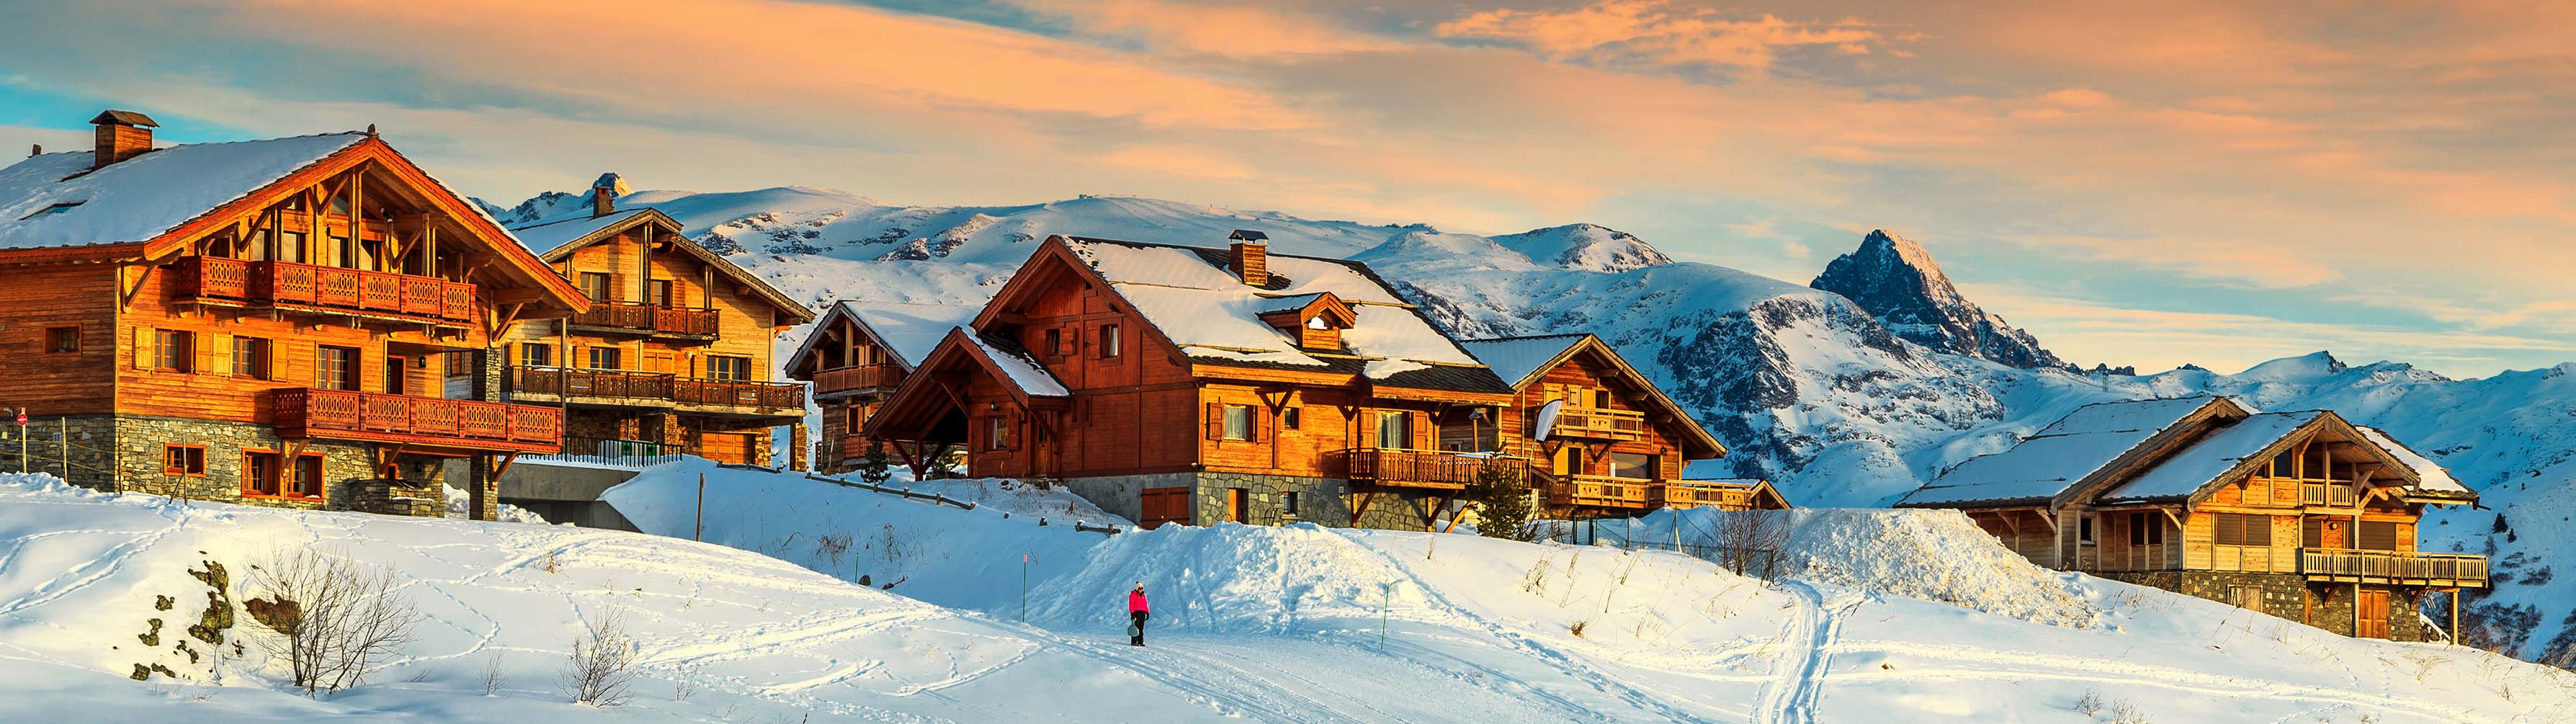 The beautiful chalets of Alpe d'Huez during sunset or dawn.